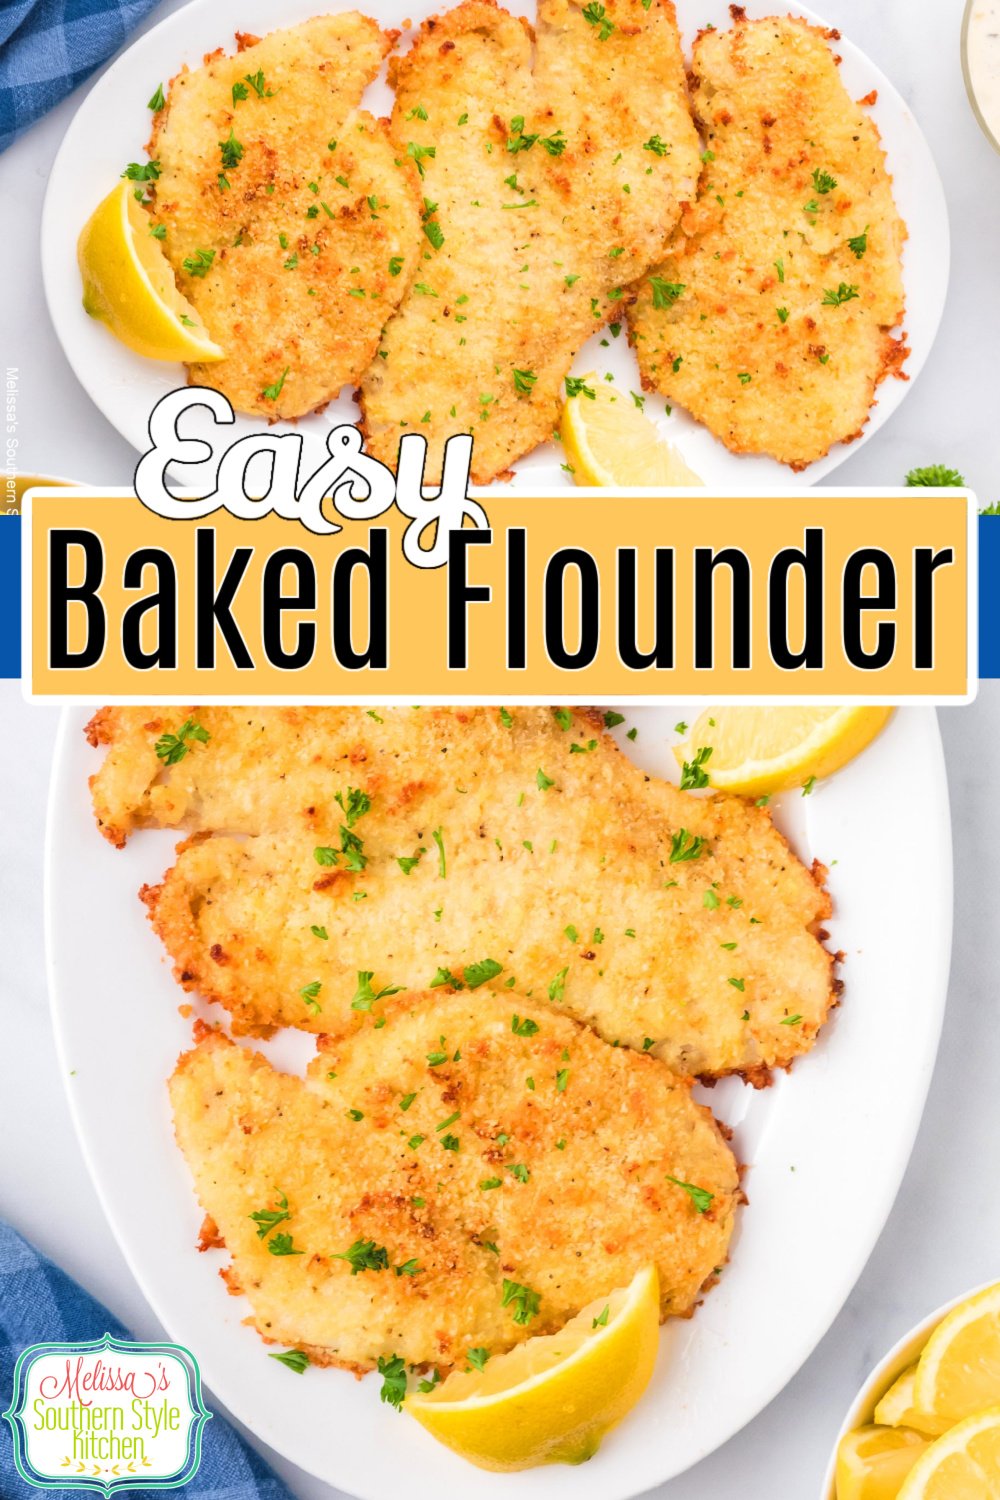 This crispy Baked Flounder recipe is made on a sheet pan in the oven for quick dinner preparation and easy cleanup too. #flounderrecipes #easybakedflounder #seafoodrecipes #southernstylerecipes #easydinnerideas #30minutemeals #tartersauce #fishrecipes via @melissasssk